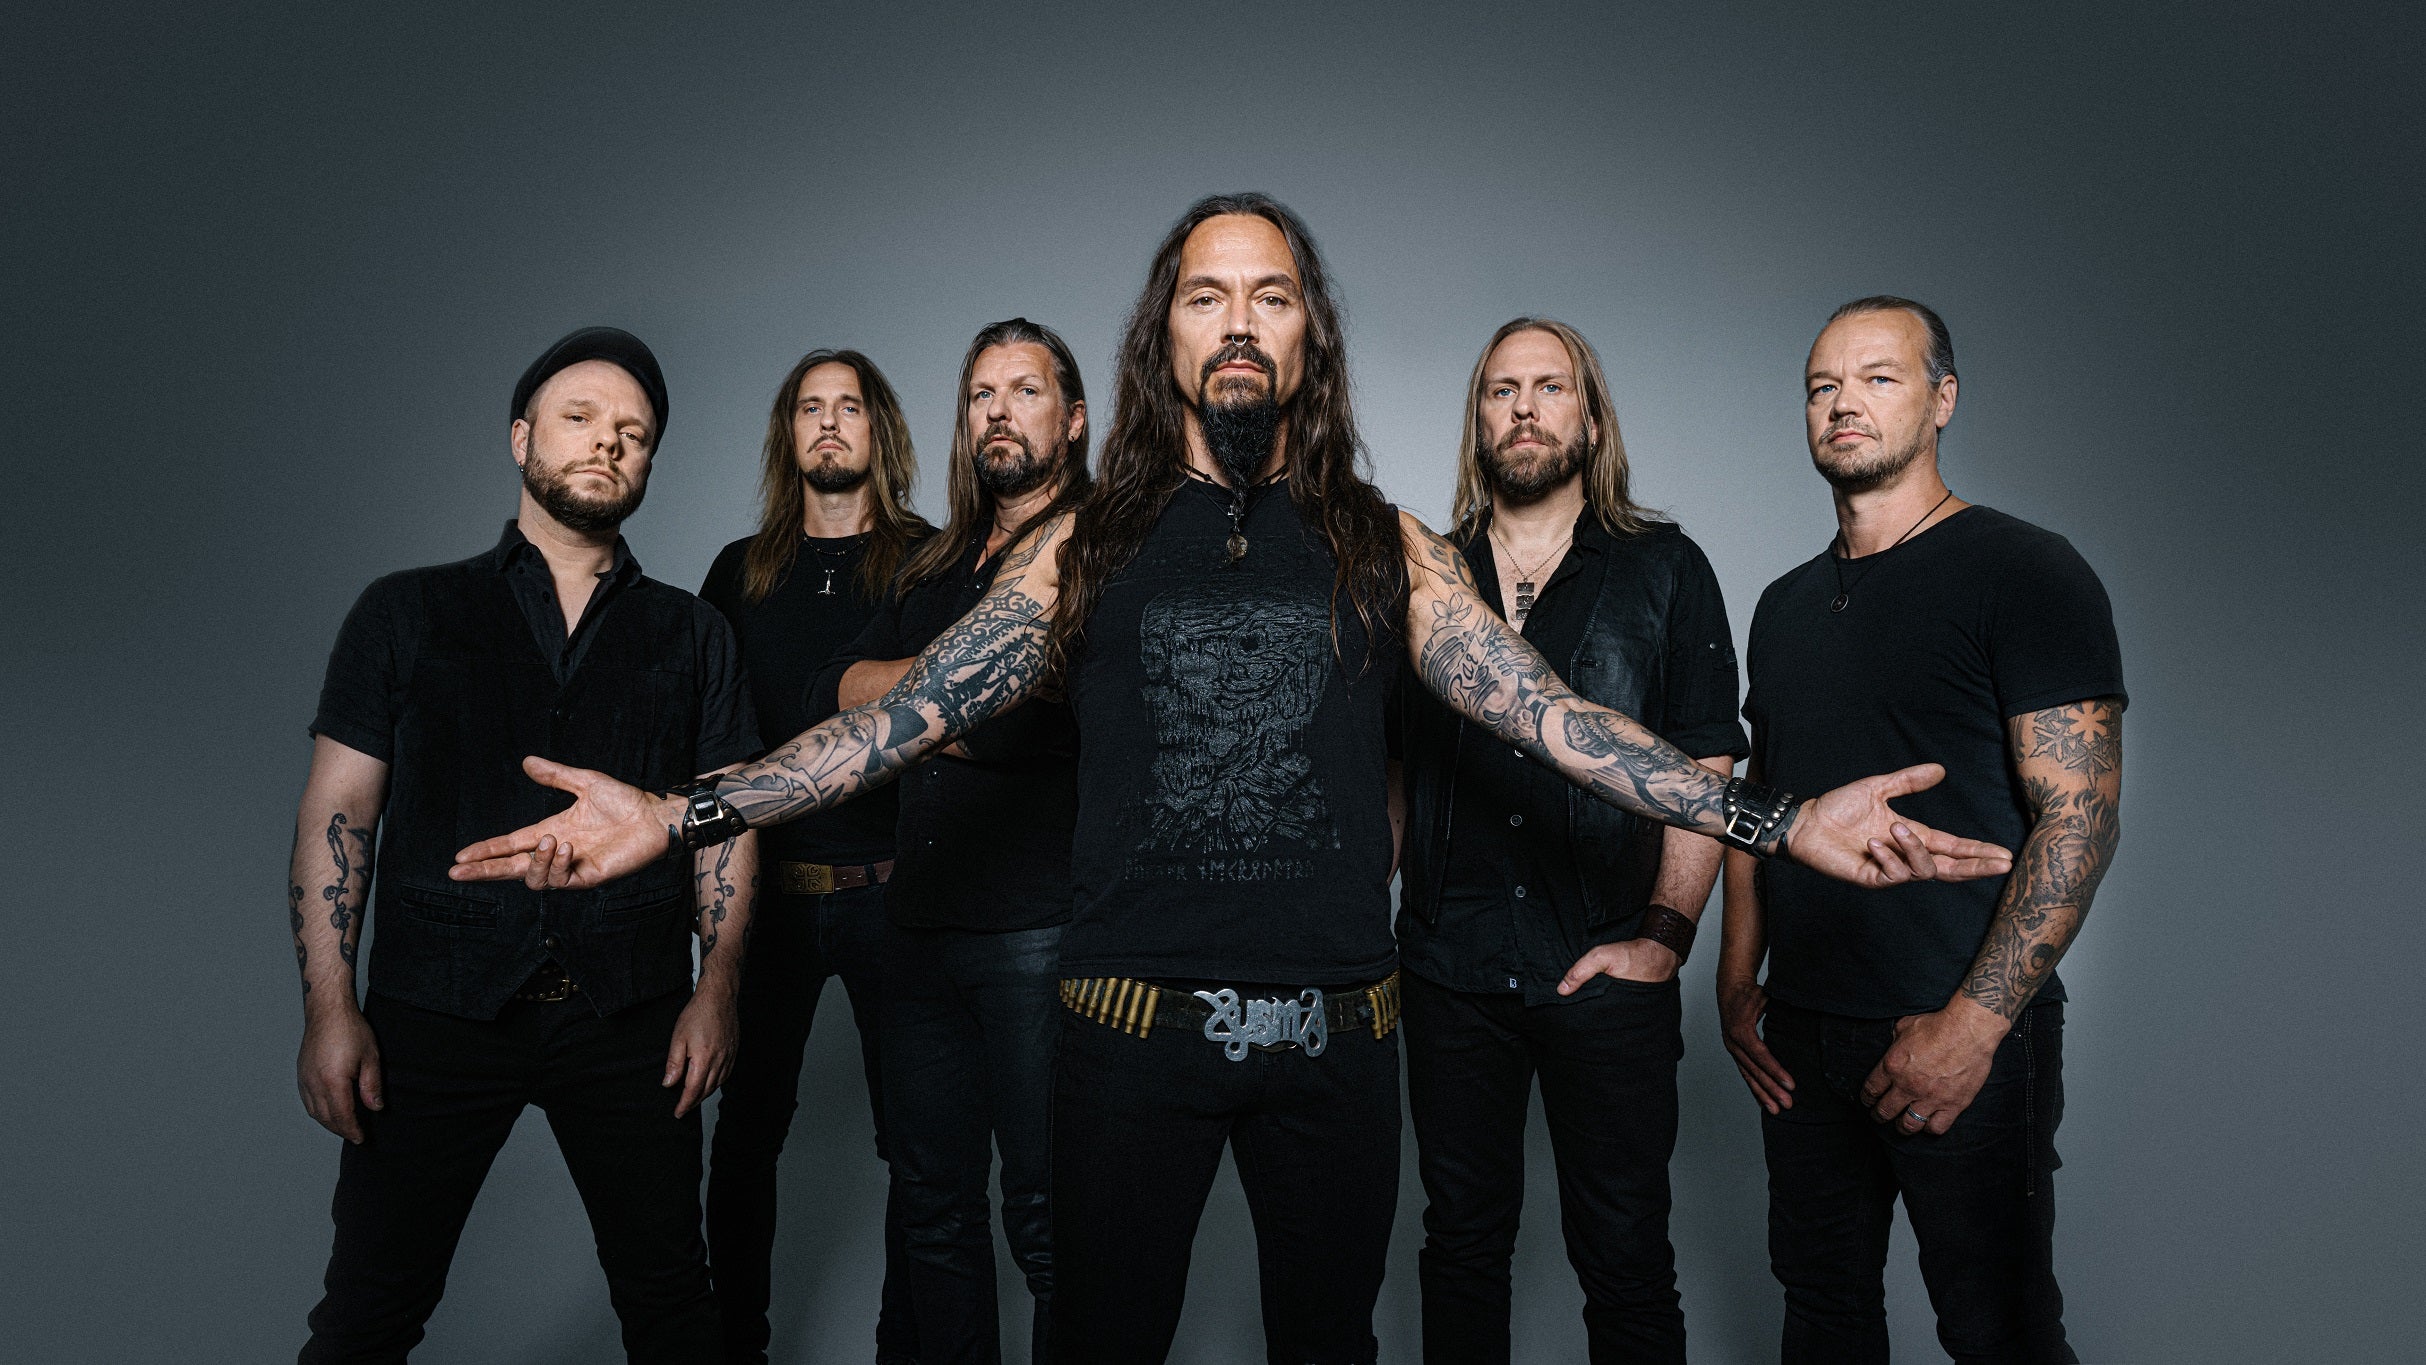 Amorphis & Dark Tranquillity in Los Angeles promo photo for Ticketmaster presale offer code